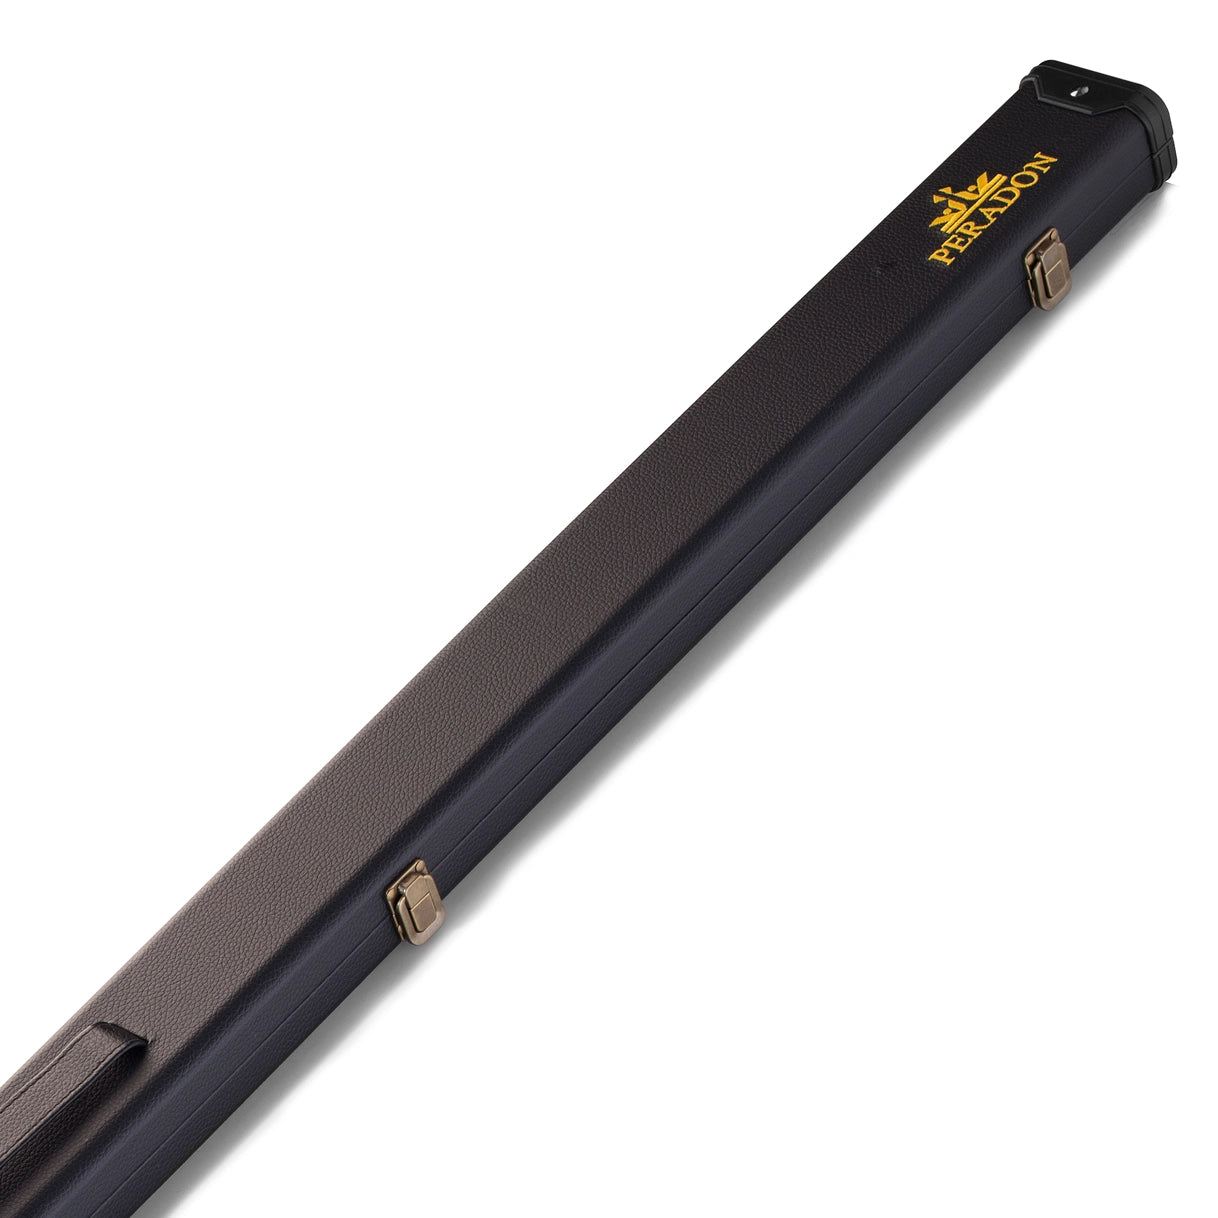 Peradon Clubman One Piece Cue Case. On angle view.